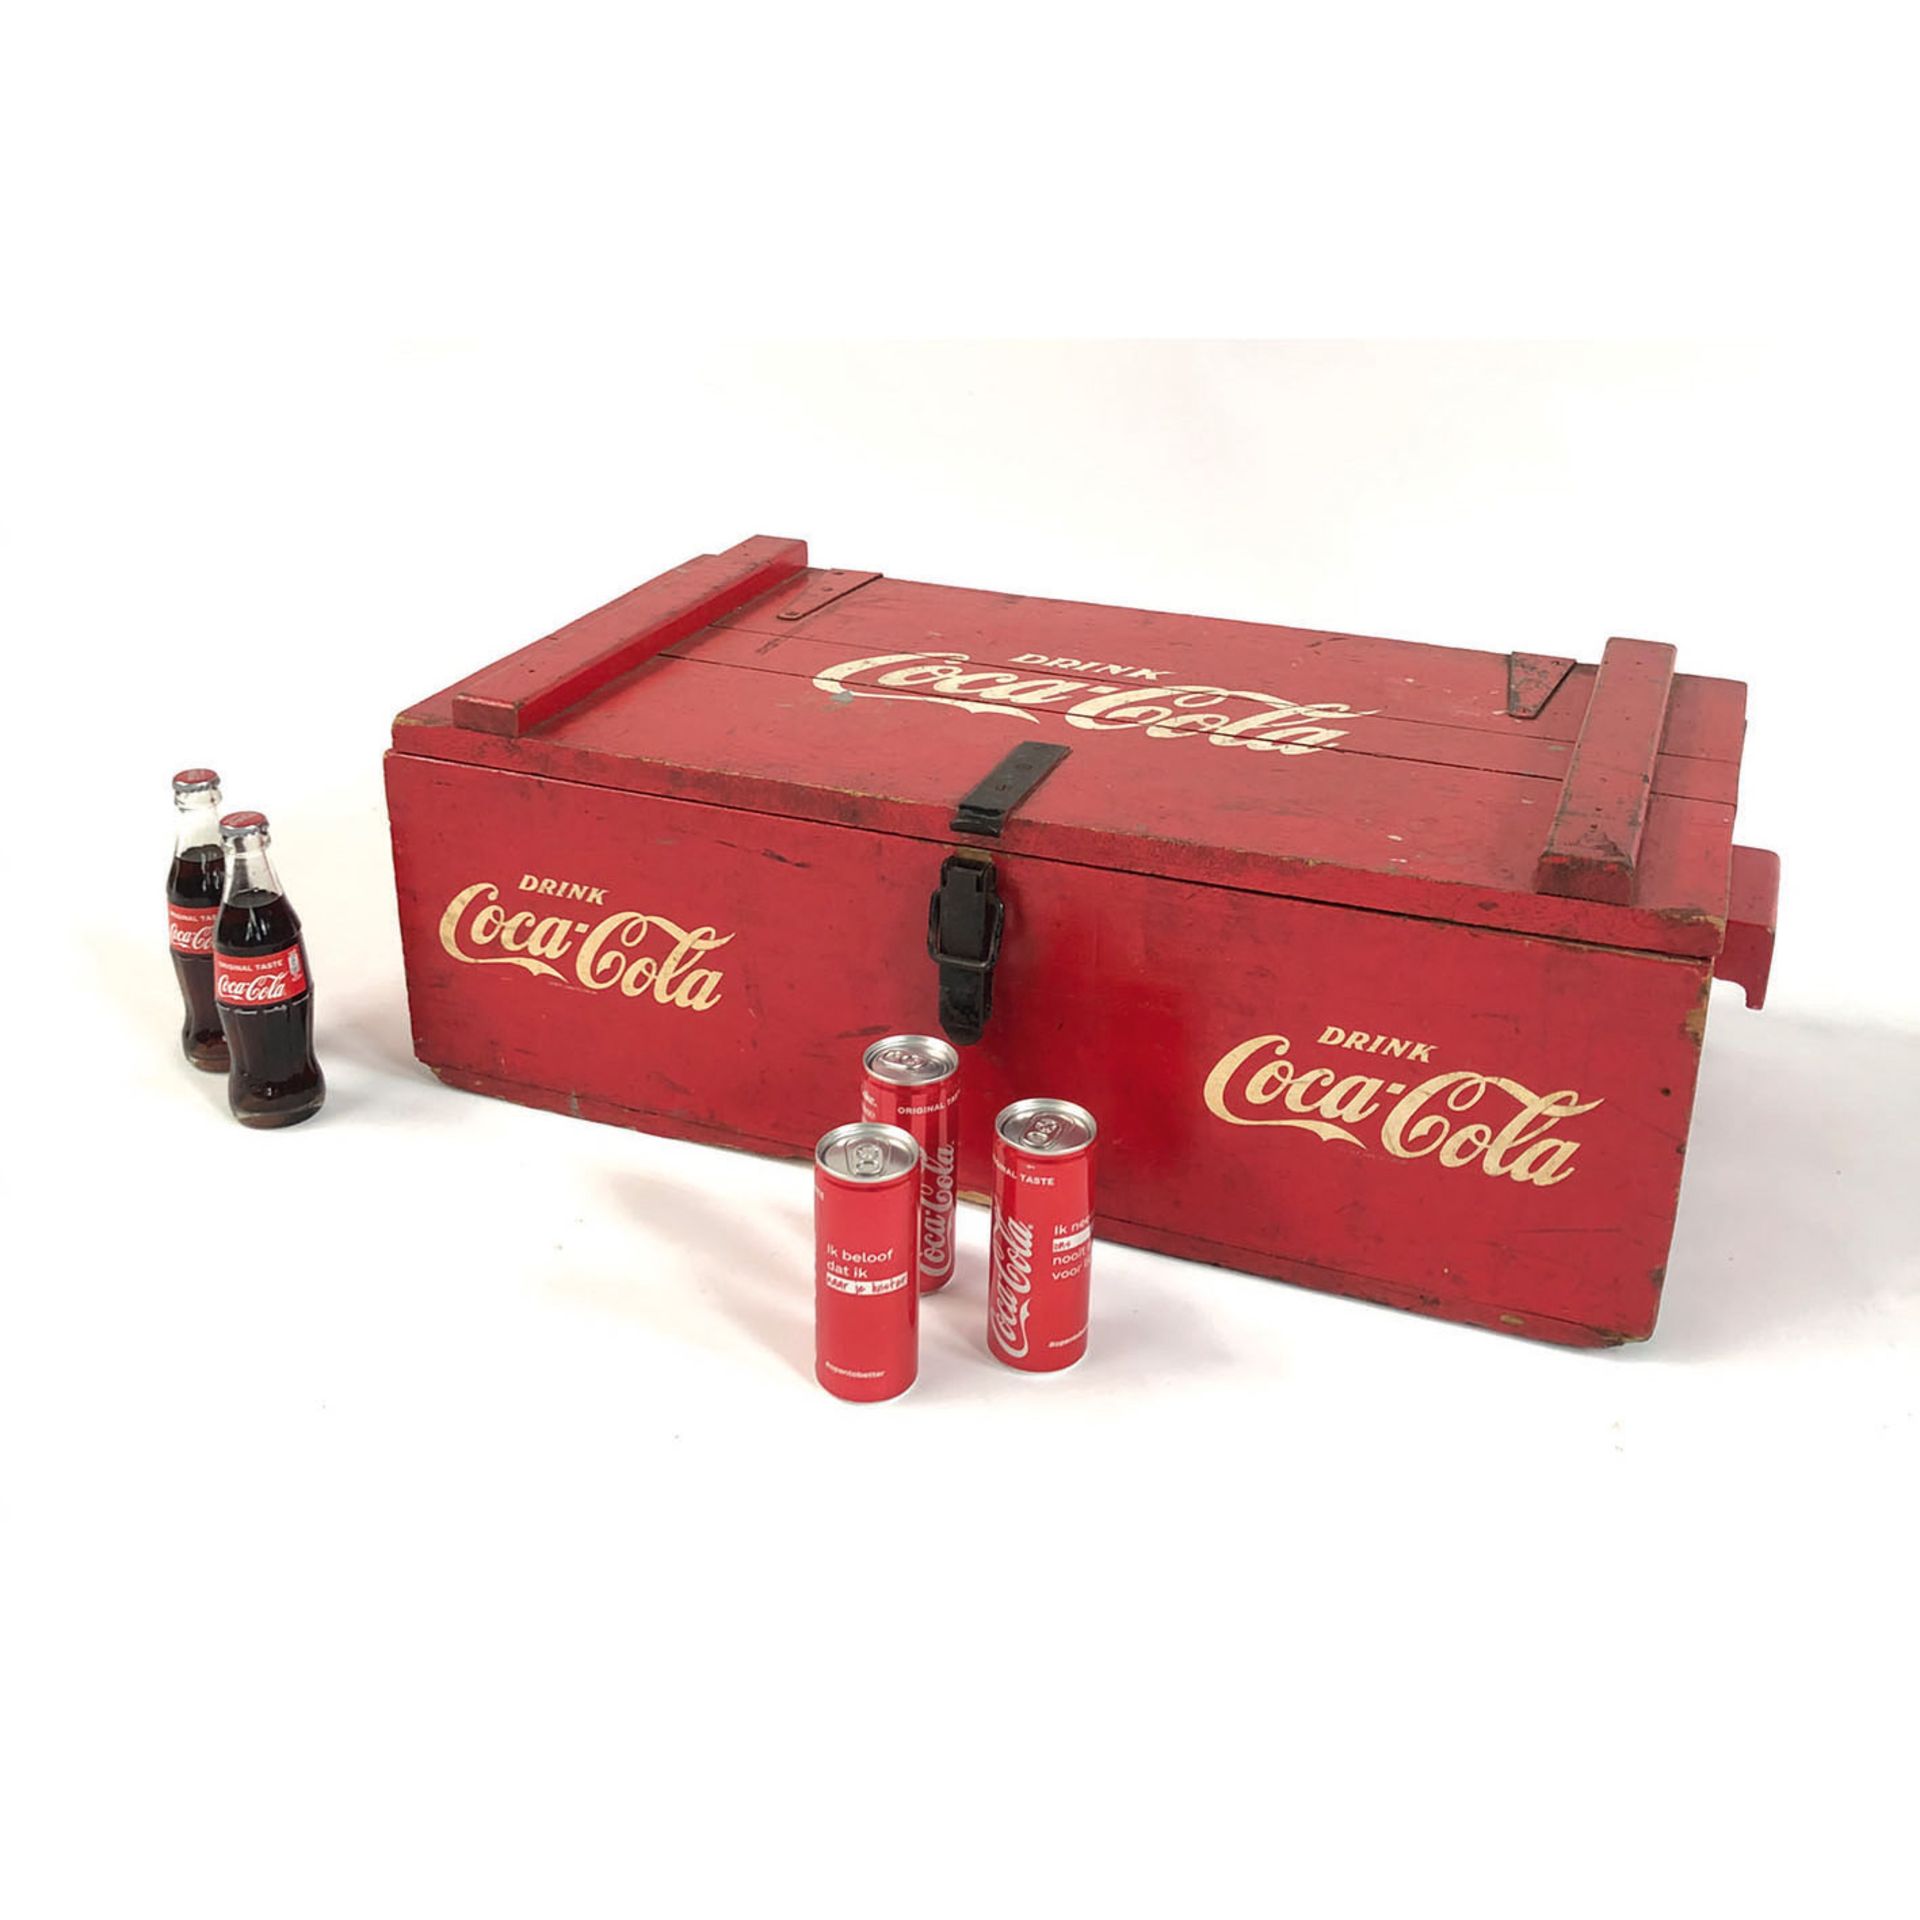 Original Coca-Cola Wooden Ice Box from Netherlands - Image 5 of 5